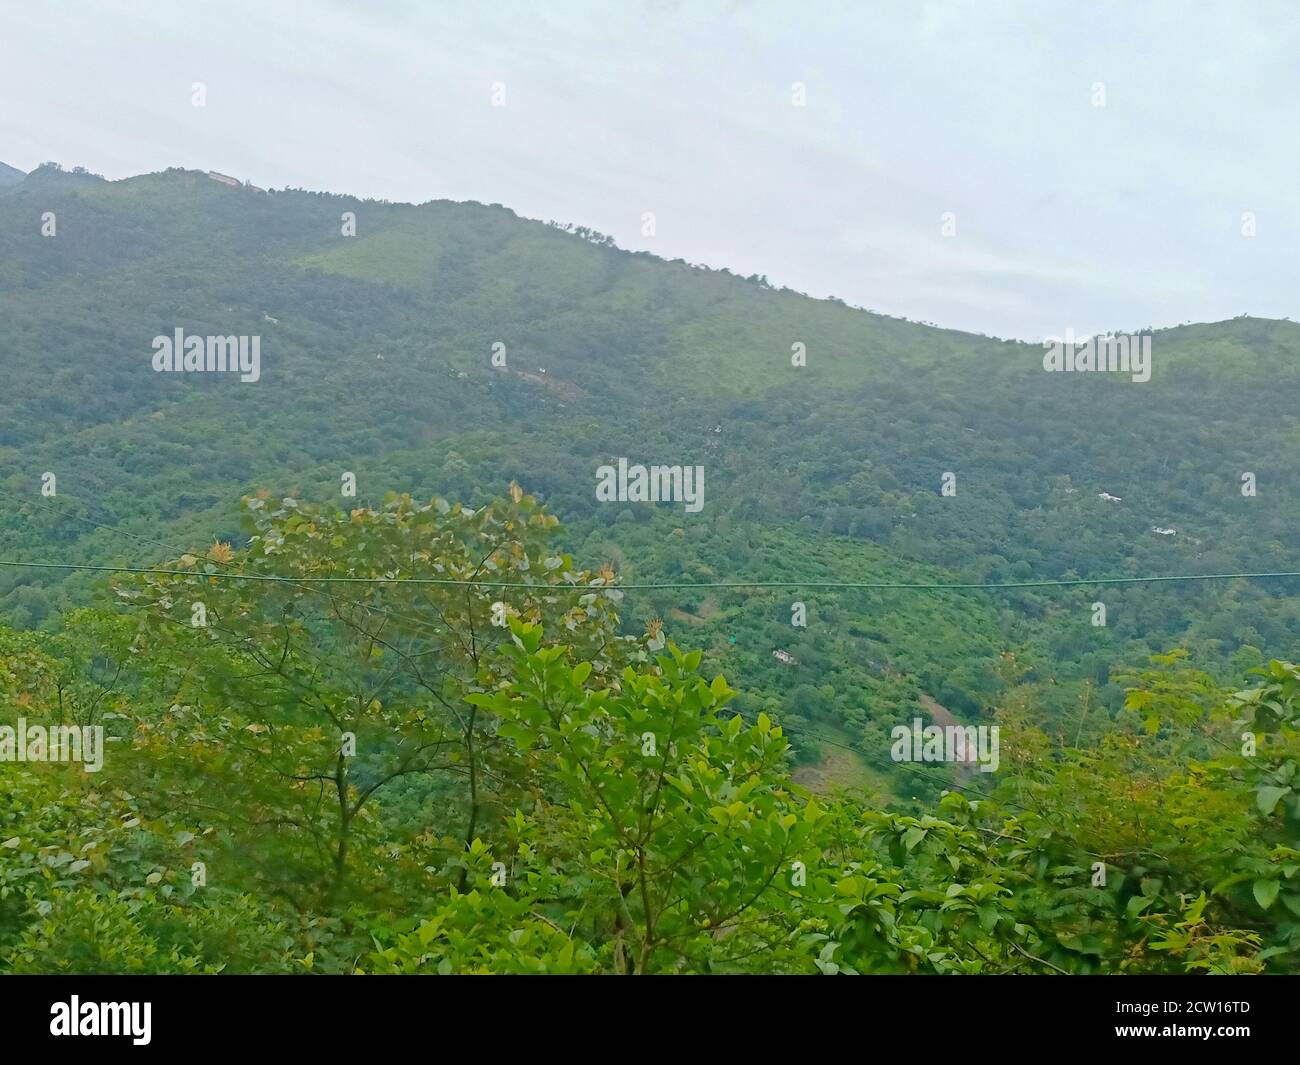 a high range mountain and trees a view from idukki india Stock Photo